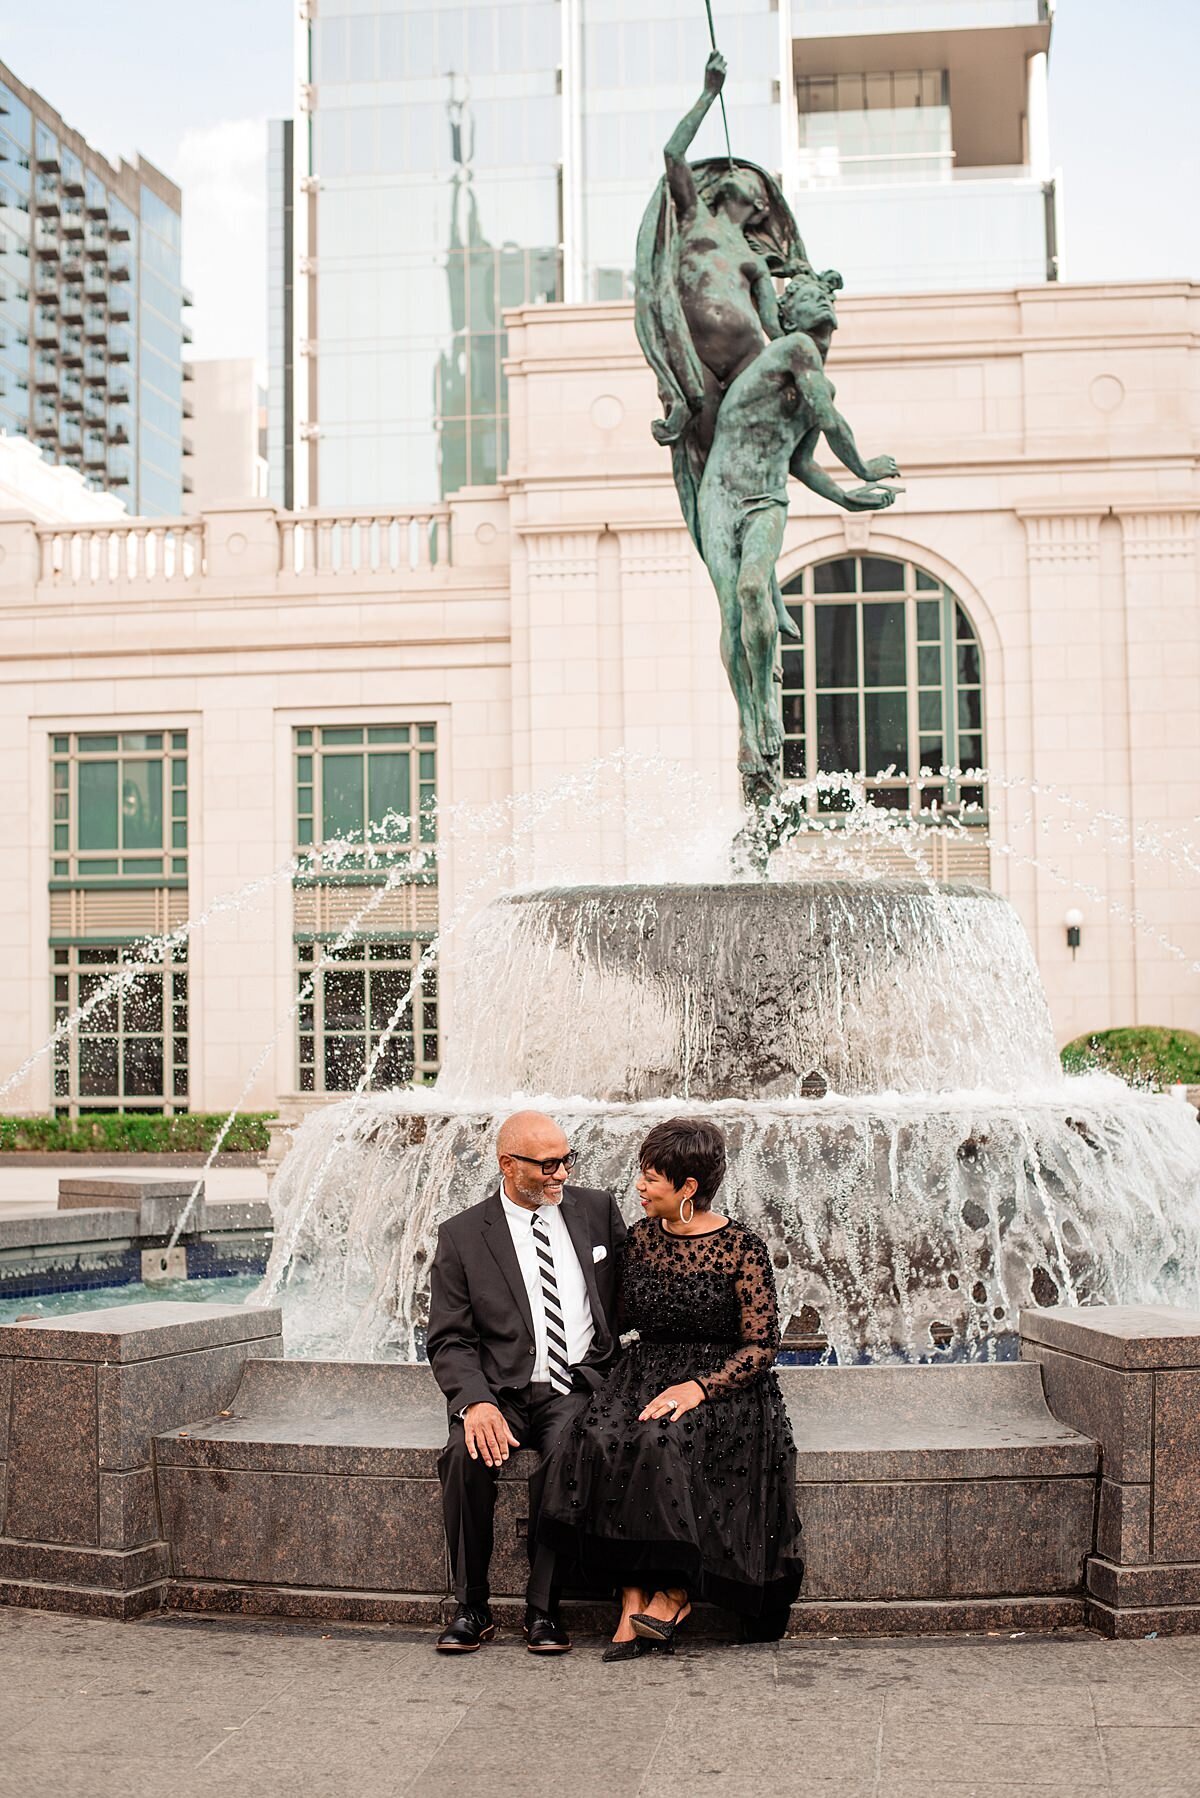 The bride and groom sit on the edge of the fountain at the schermerhorn symphony center in Nashville. The groom is wearing a black suti with a white shirt with a black and white striped tie. The bride is wearing a black dress with a sheer neckline and sheer long sleeves. The dress is adorned with tiny black flowers with rhinestones in the center of each flower.